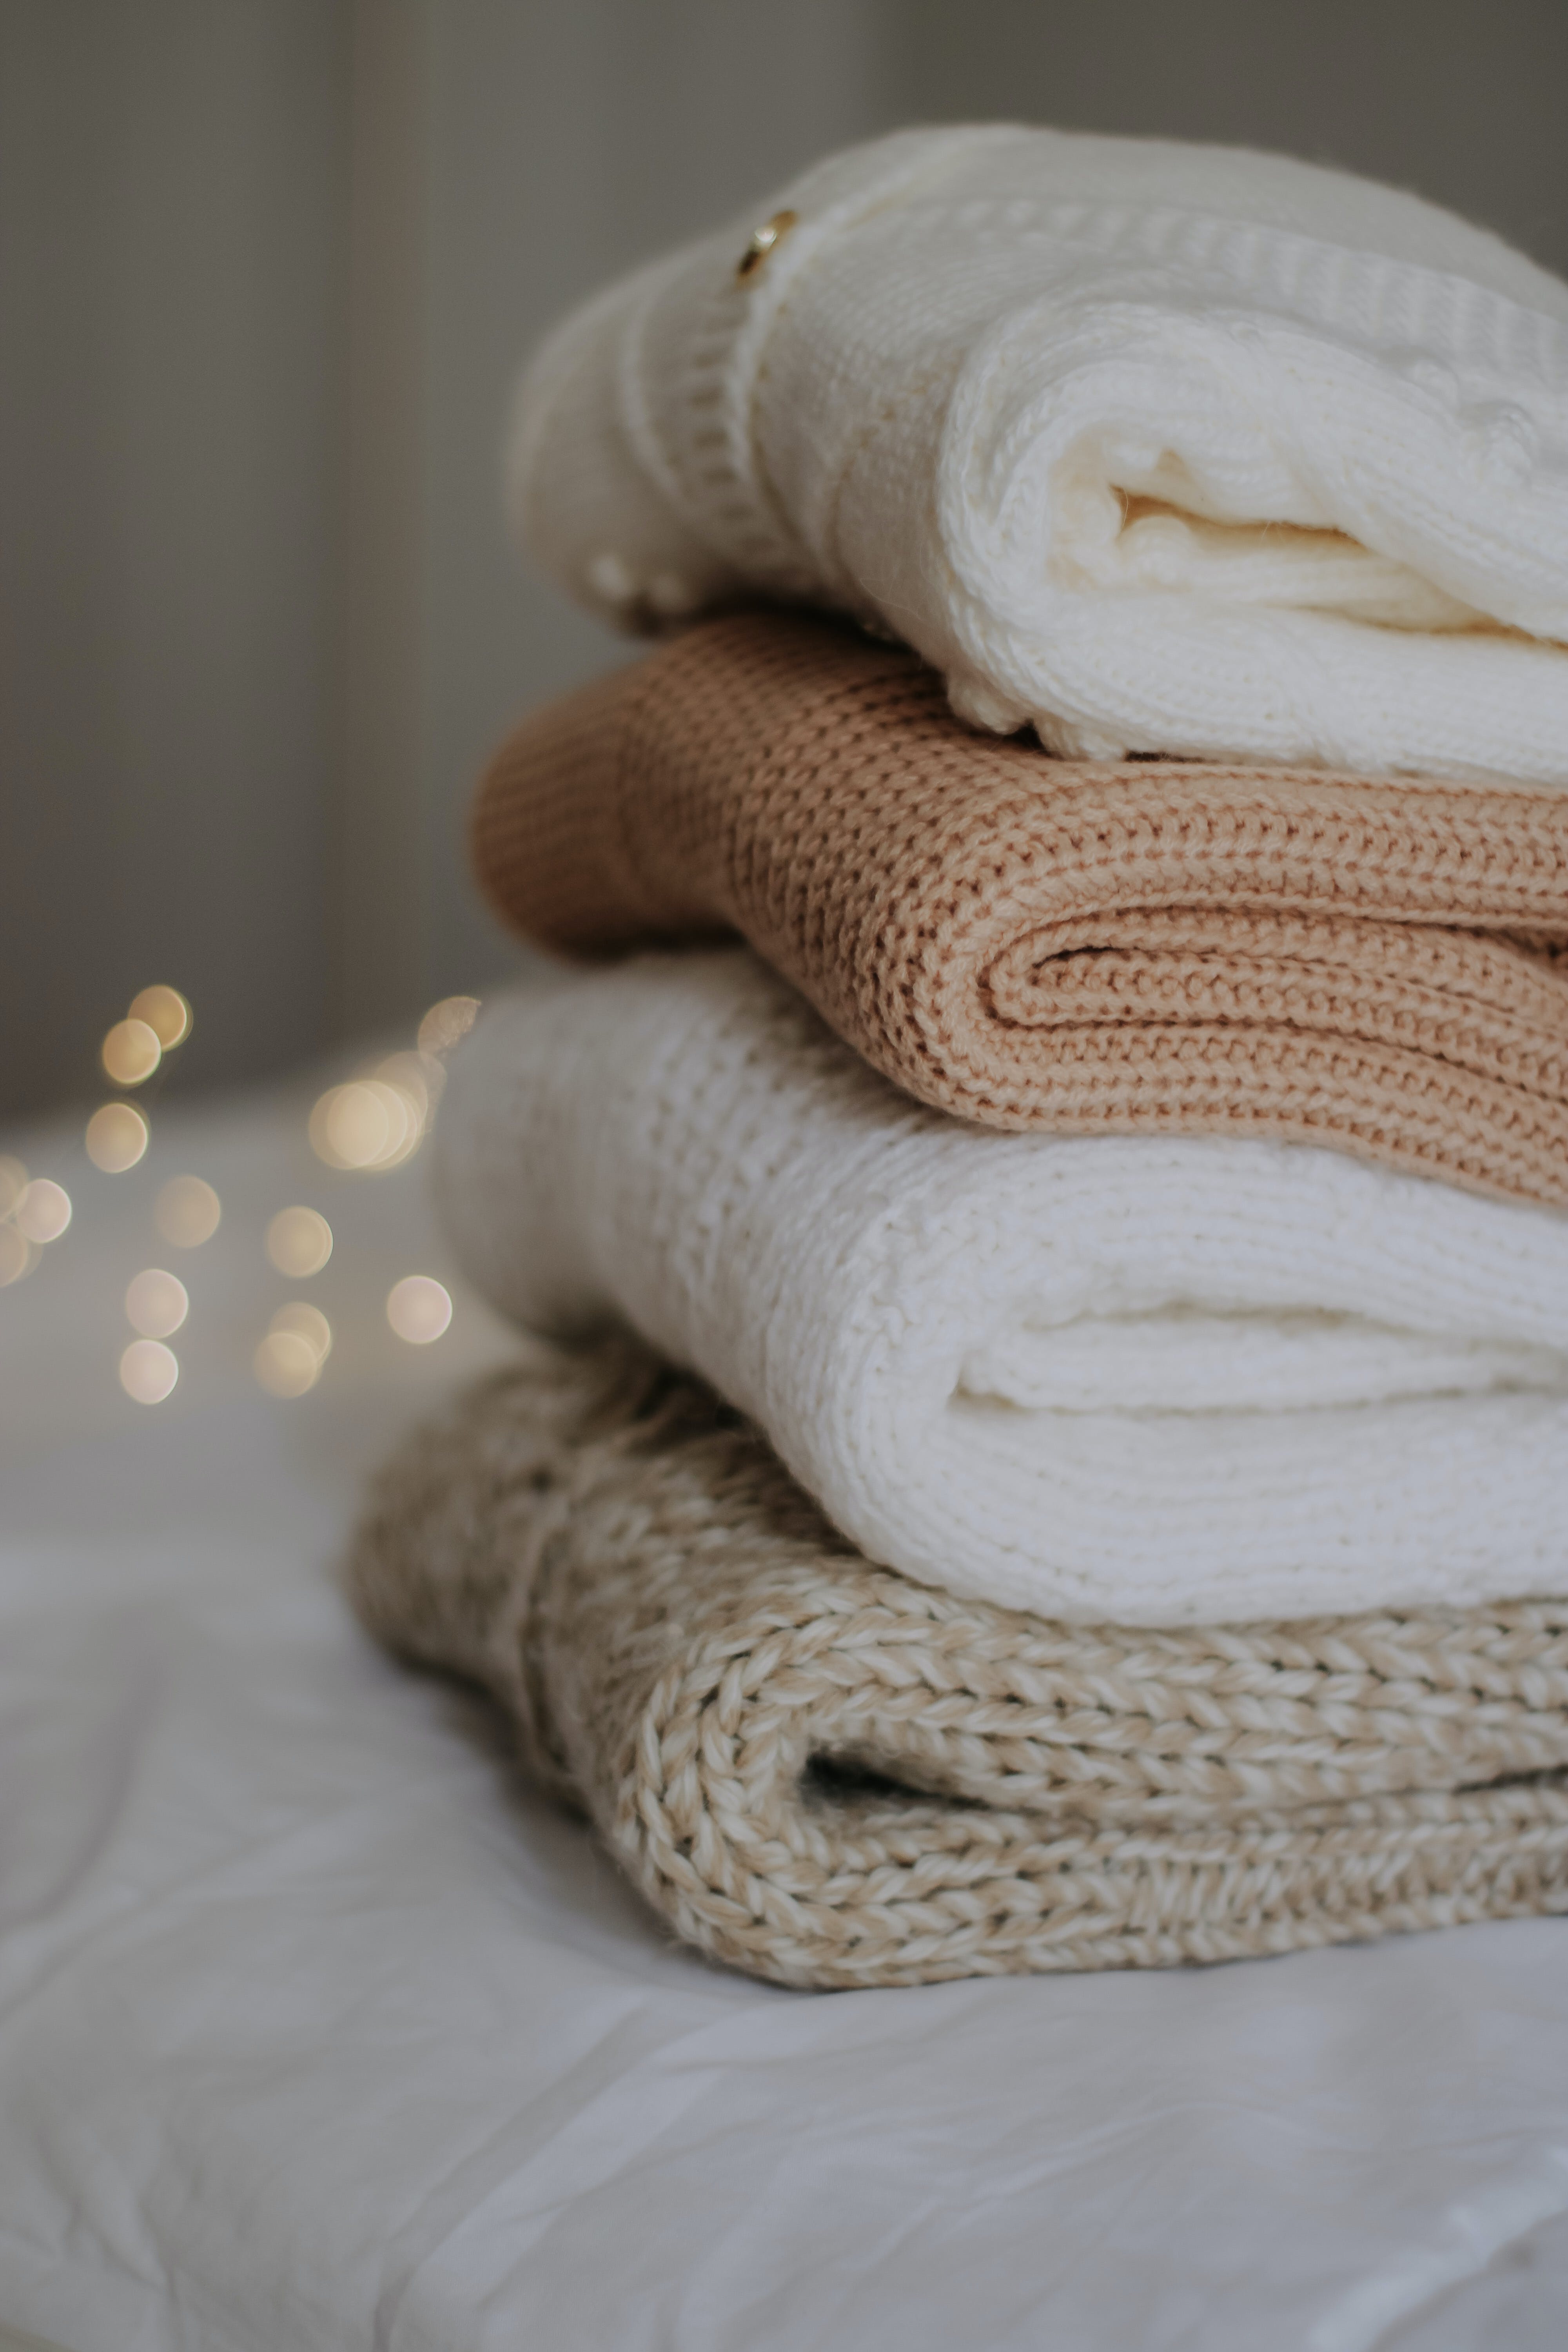 A folded stack of clothes | Source: Pexels